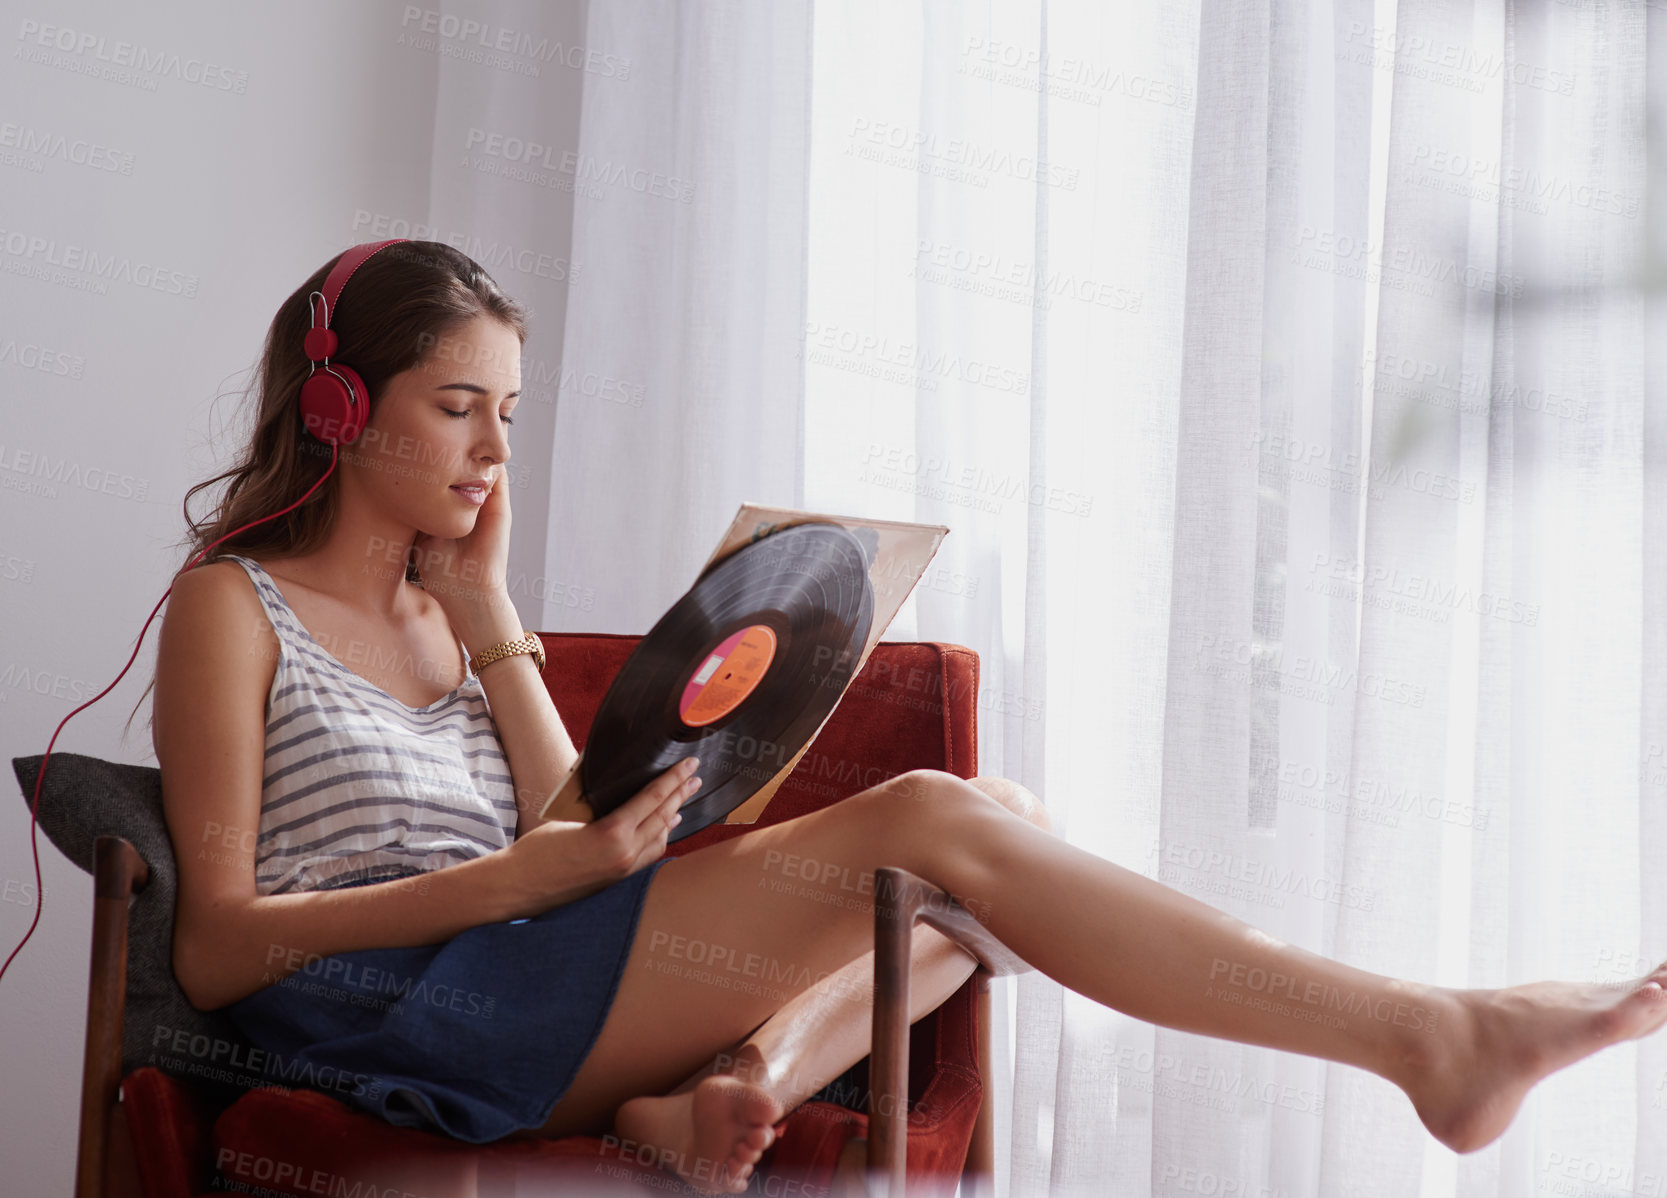 Buy stock photo Shot of a young woman listening to music while relaxing at home